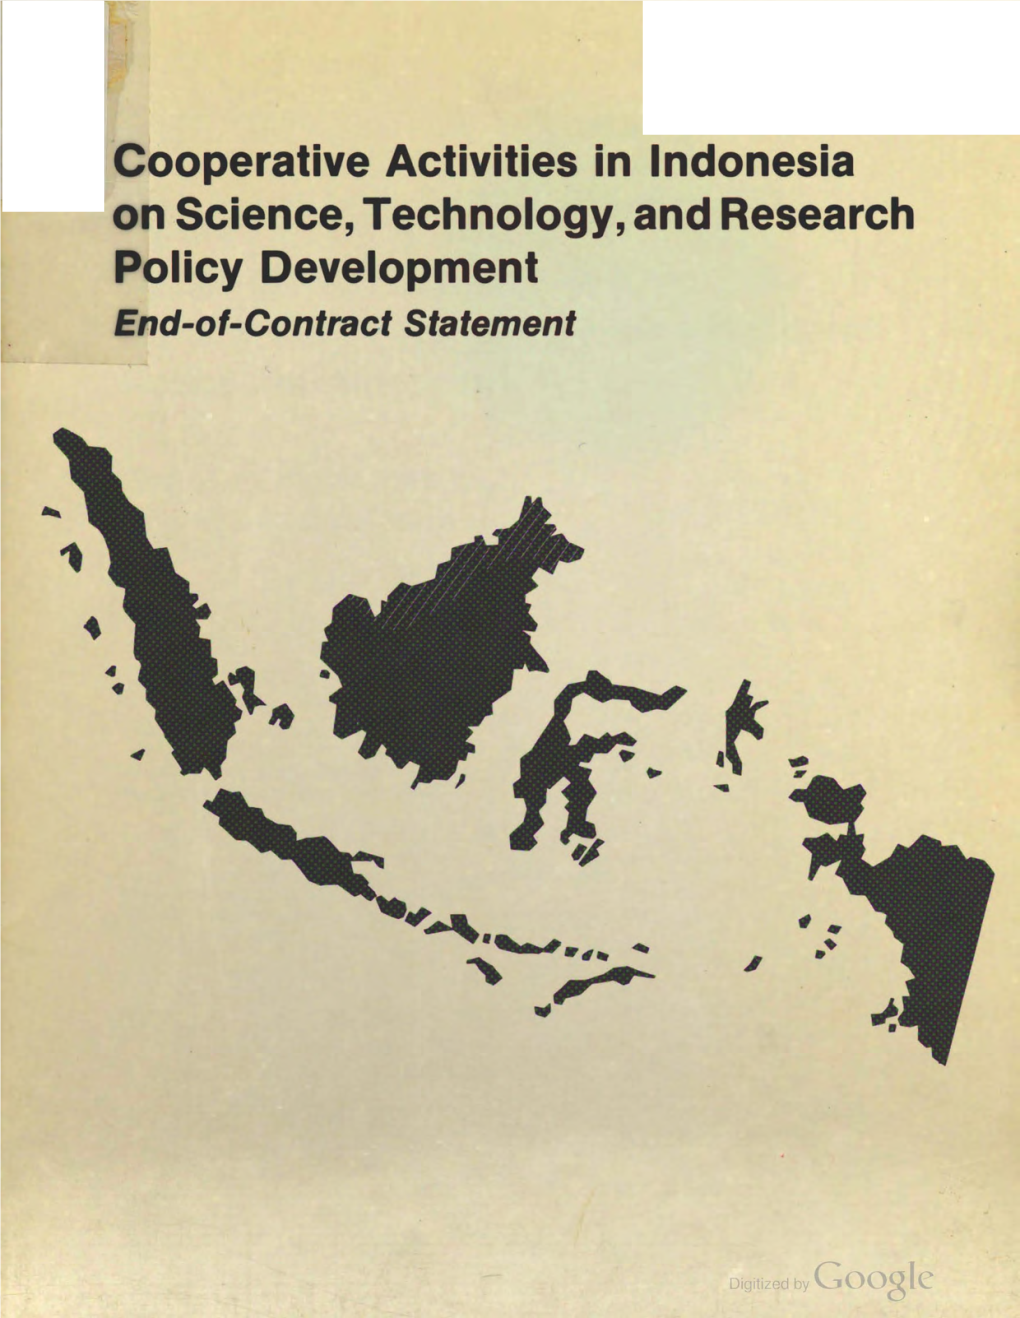 Cooperative Activities in Indonesia on Science, Technology, and Research Policy Development End-At-Contract Statement